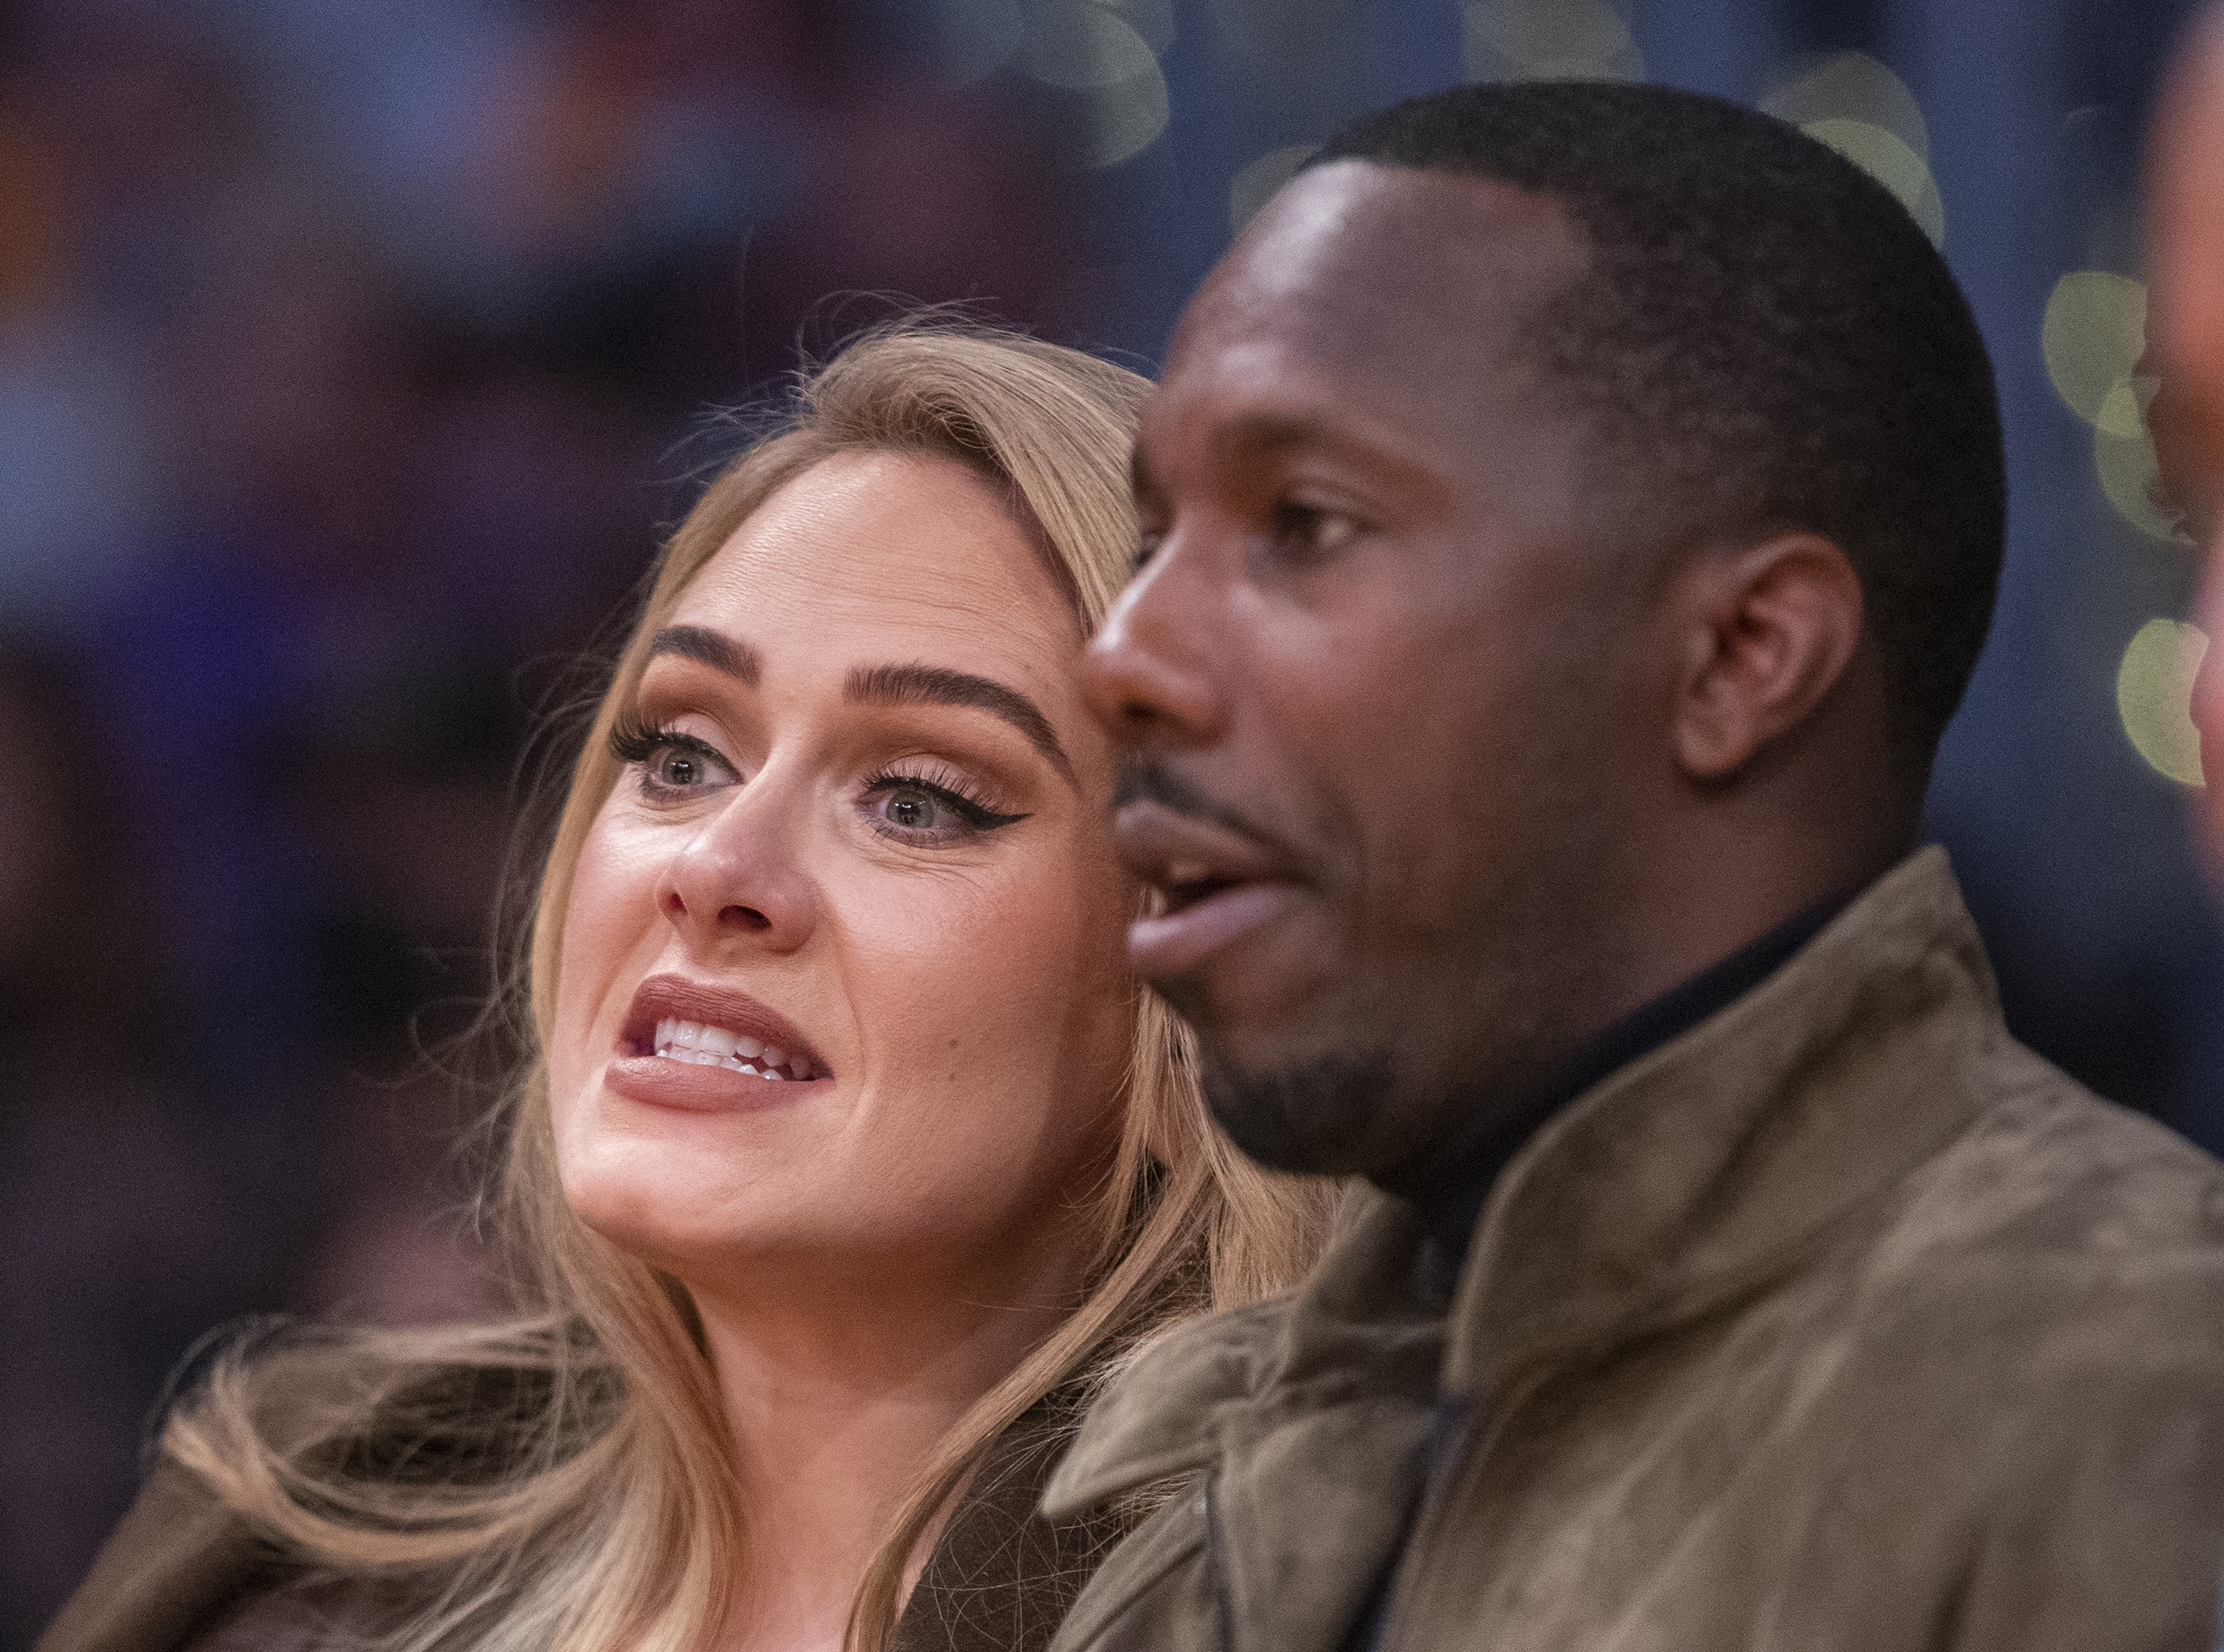 <p>In November 2021, music star <a href="https://www.wonderwall.com/celebrity/profiles/overview/adele-645.article">Adele</a> opened up about how she got together with boyfriend Rich Paul, a sports agent who works with some of the biggest names in the NBA, in 2021 in the wake of her divorce from Simon Konecki. "I met him at a birthday party, we were on the dance floor," she told Oprah Winfrey on the CBS special "<a href="https://www.wonderwall.com/celebrity/profiles/overview/adele-645.article">Adele</a> One Night Only." "And then we met a couple years later. We went out for dinner, which he says was a business meeting, and I'm like, 'A business meeting about what?' And then it was the first time we hung out on our own. Without friends. And I think that was a natural way that people would meet each other in real life."</p>